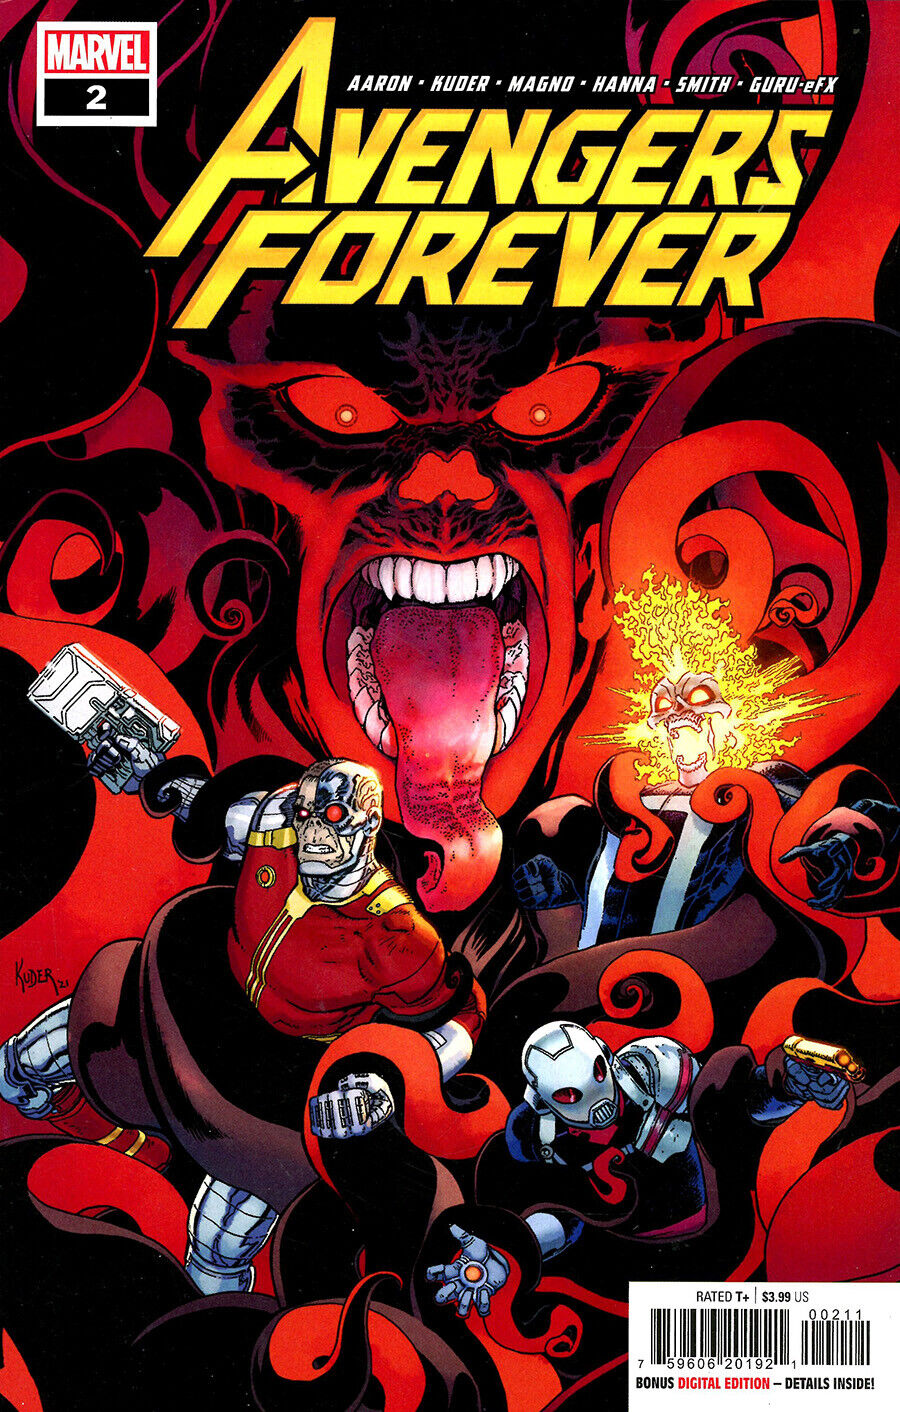 AVENGERS FOREVER SERIES LISTING (#2-15 AVAILABLE/VARIANTS/YOU PICK)